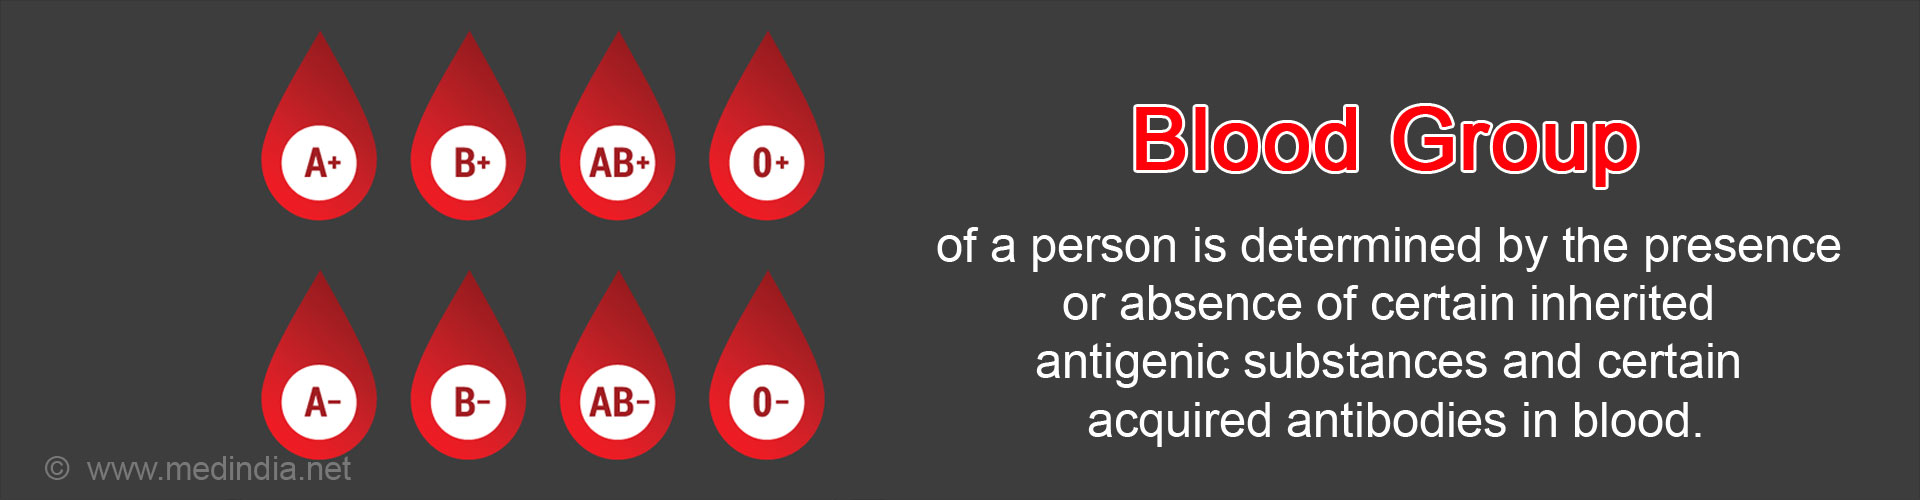 Blood group of a person is determined by the presence or absence of certain inherited antigenic substances and certain acquired antibodies in blood